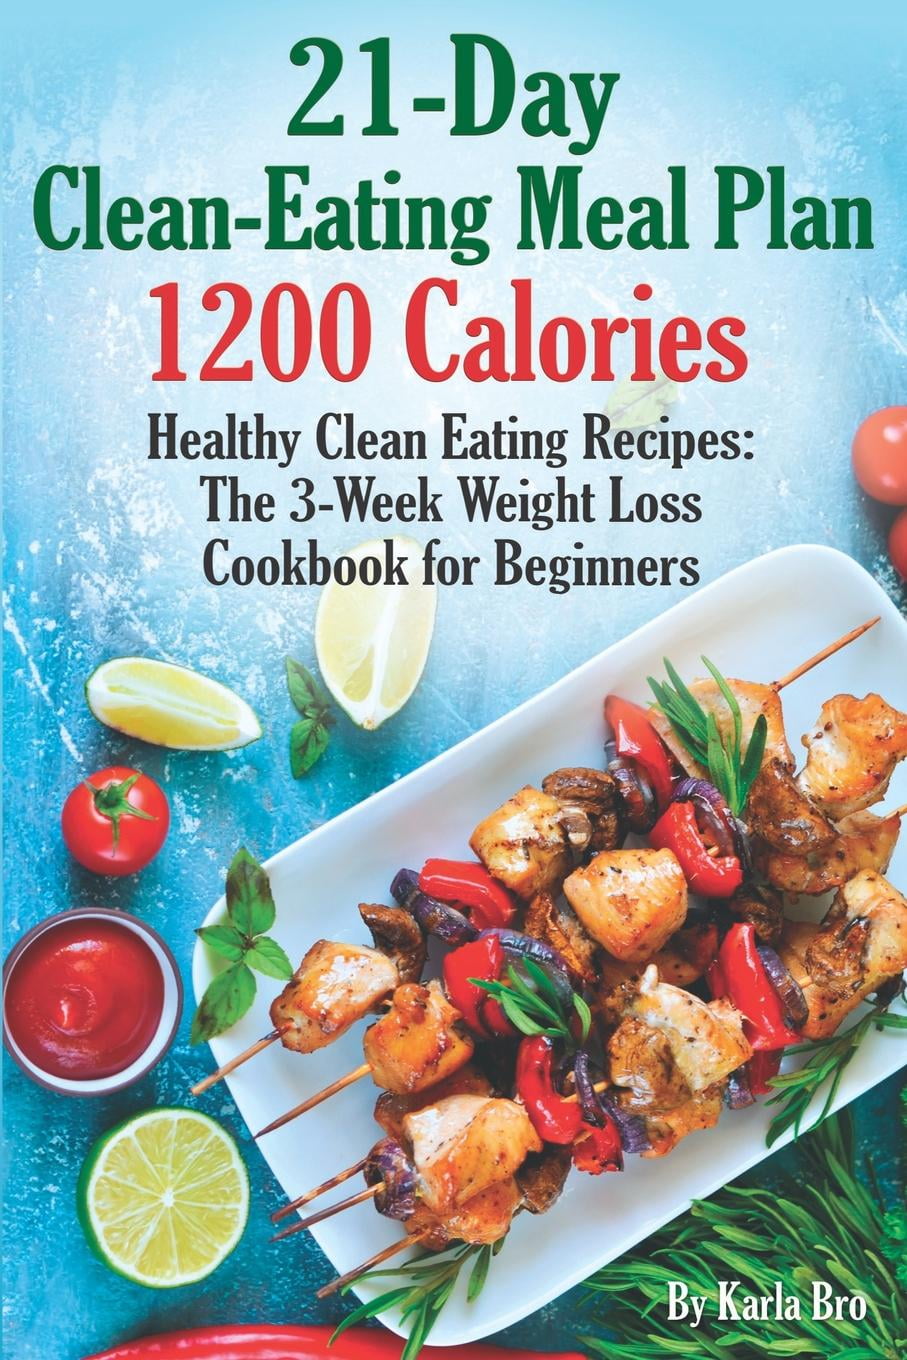 21-Day Clean- Eating Meal Plan - 1200 Calories Healthy 